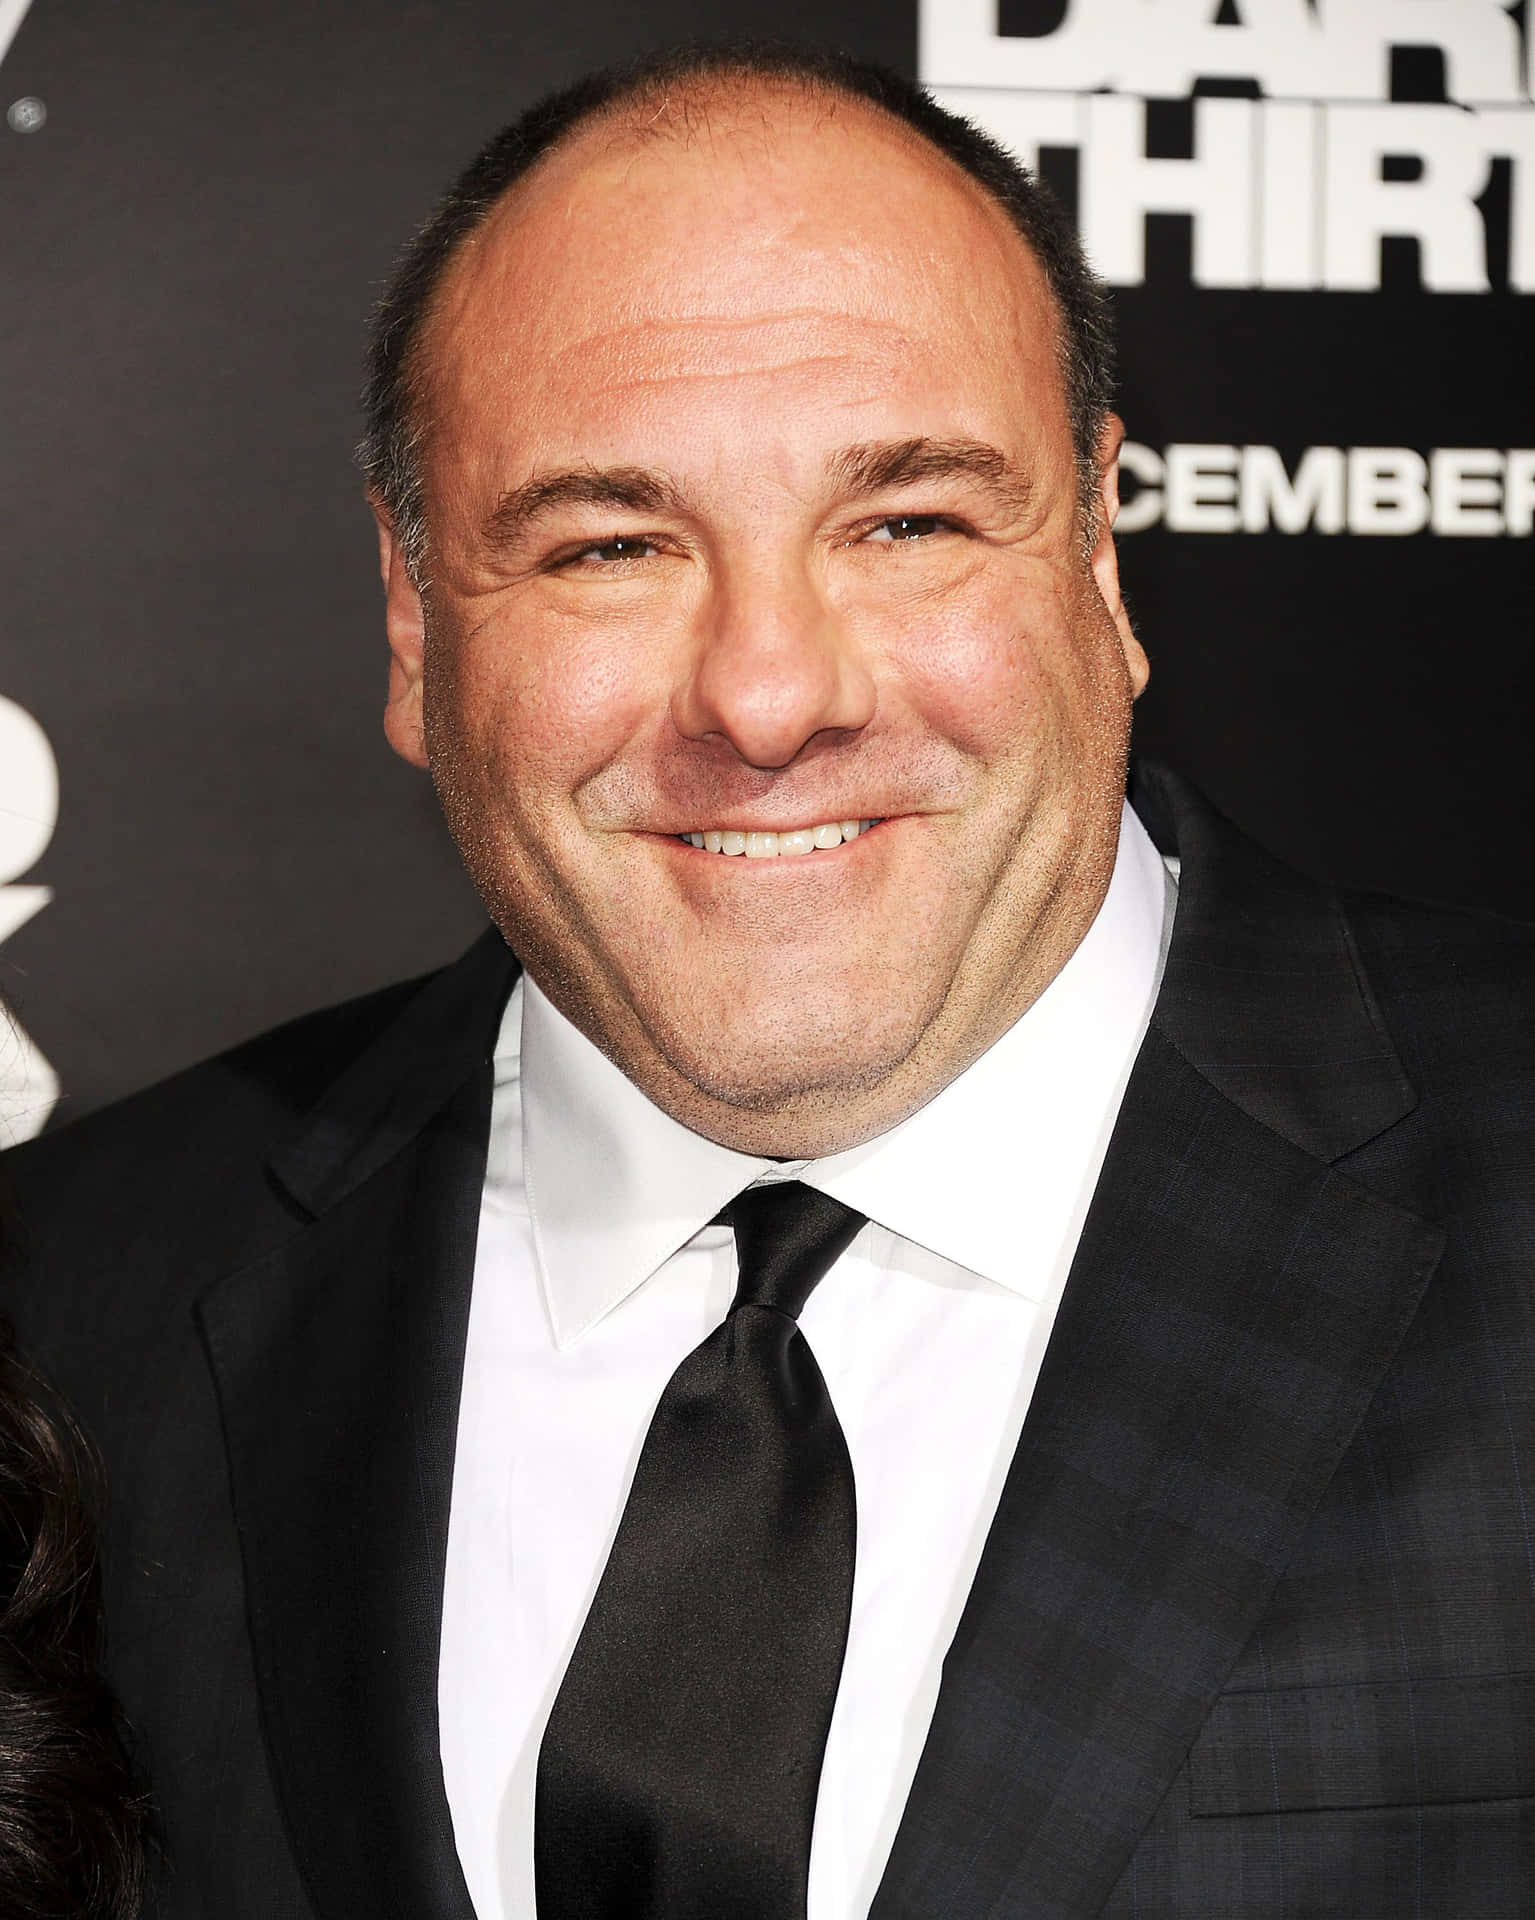 Jamesgandolfini Is An Actor Who Is Known For His Role As Tony Soprano In The Tv Series 